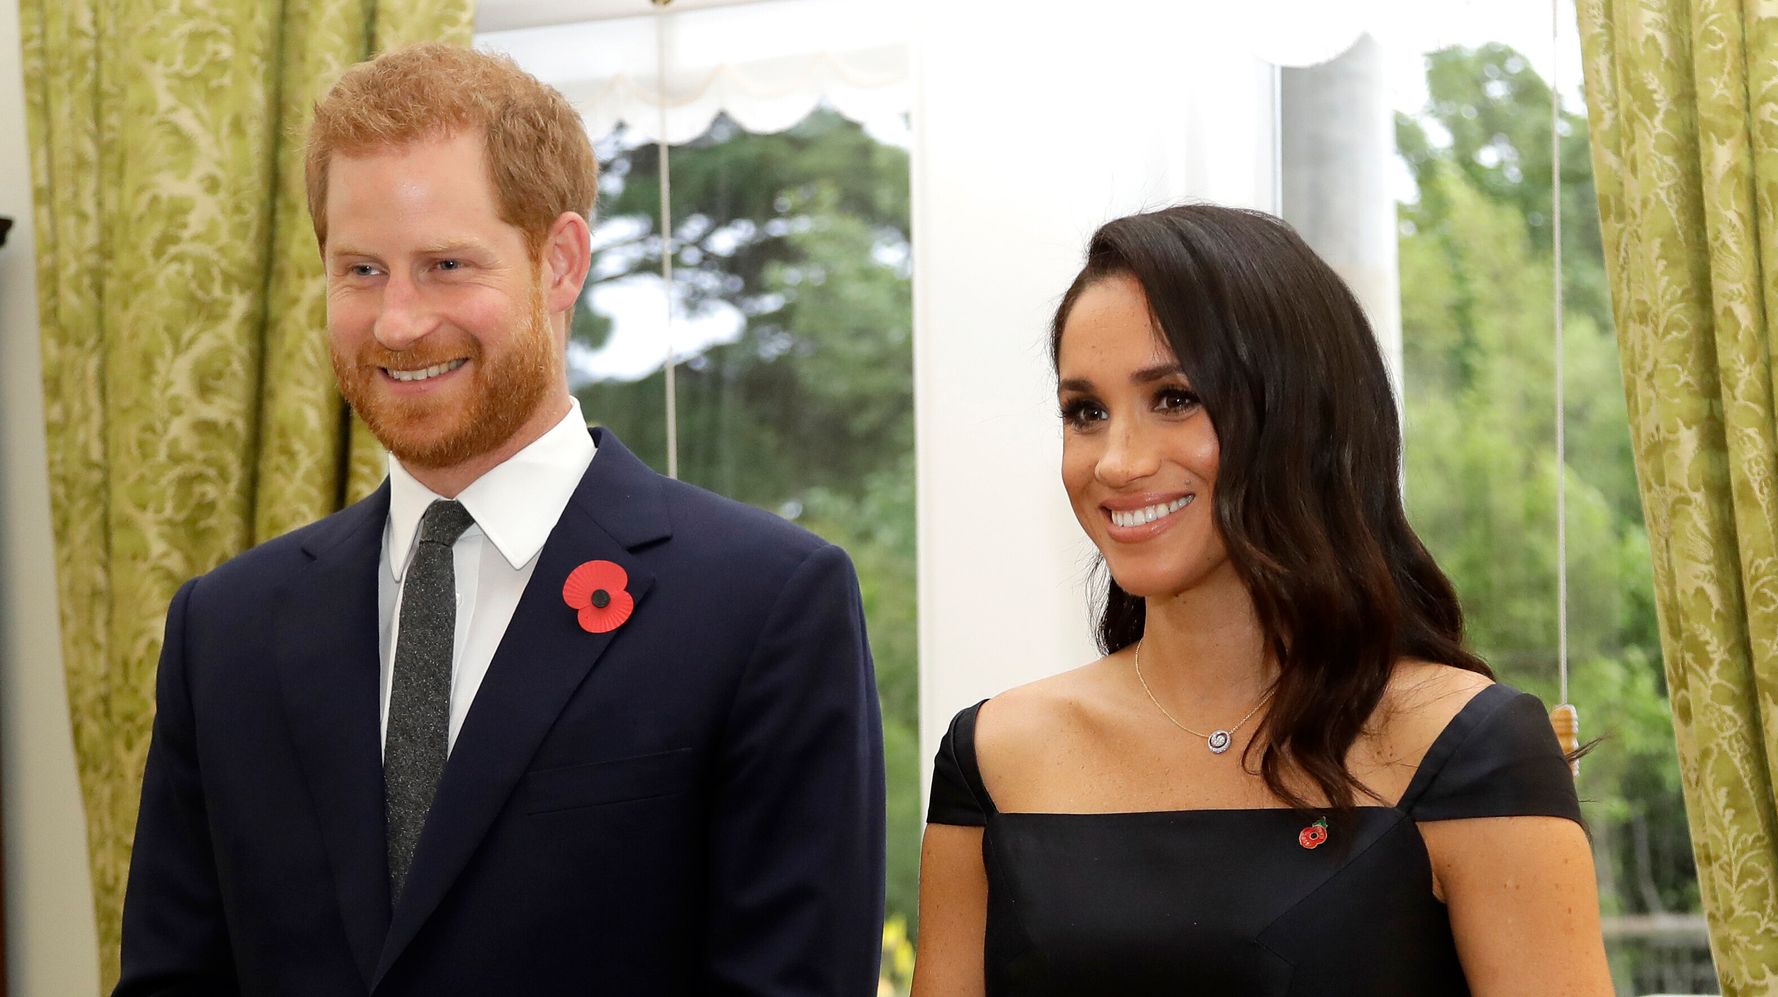 Meghan Markle, Prince Harry show ‘Service Is Universal’ with storm relief in Texas